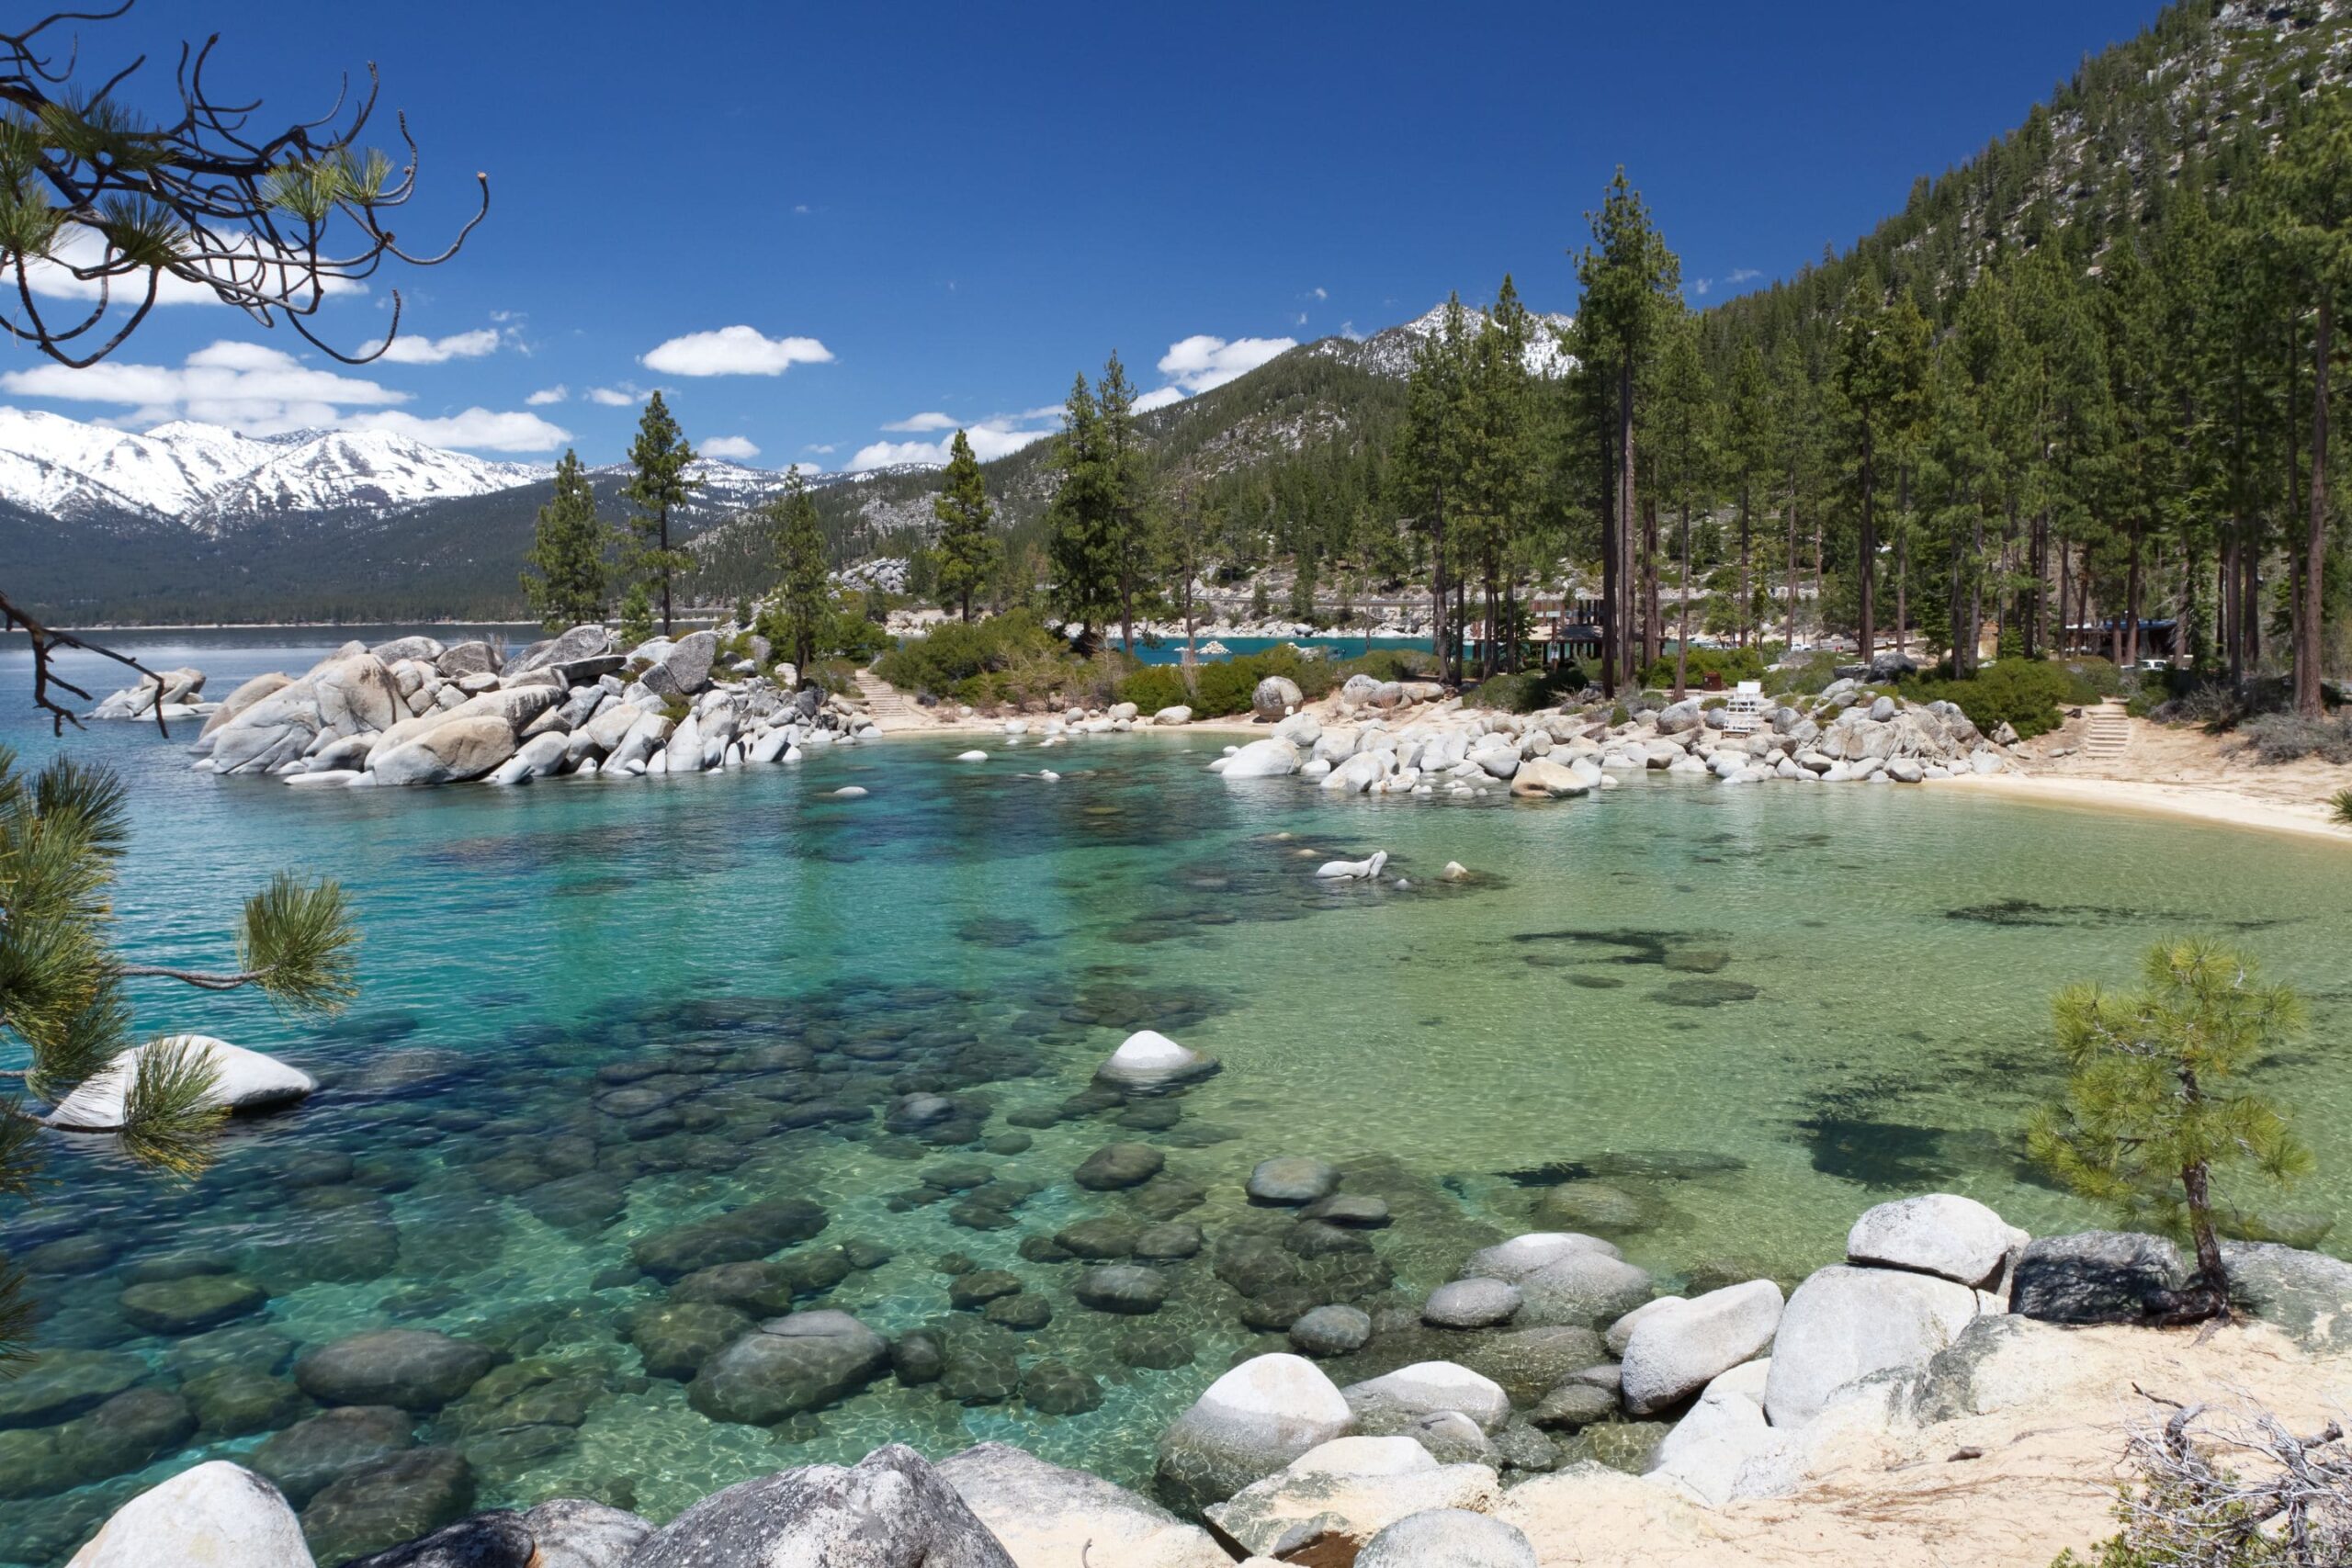 crystal clear water surrounded by a rocky shoreline and evergreen trees around Lake Tahoe